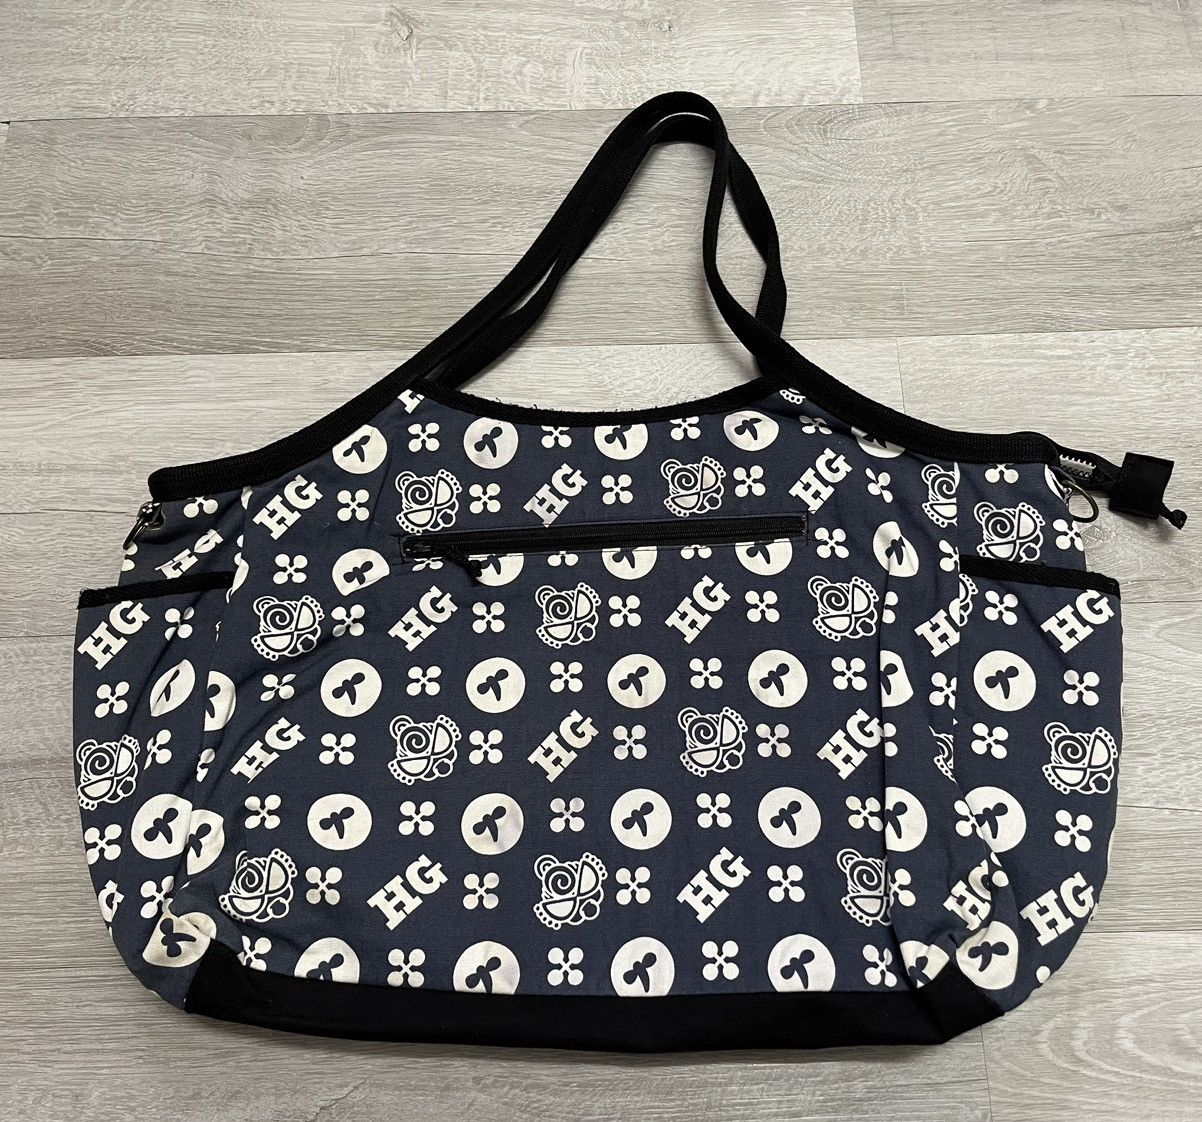 hysteric glamour tote bag - 6